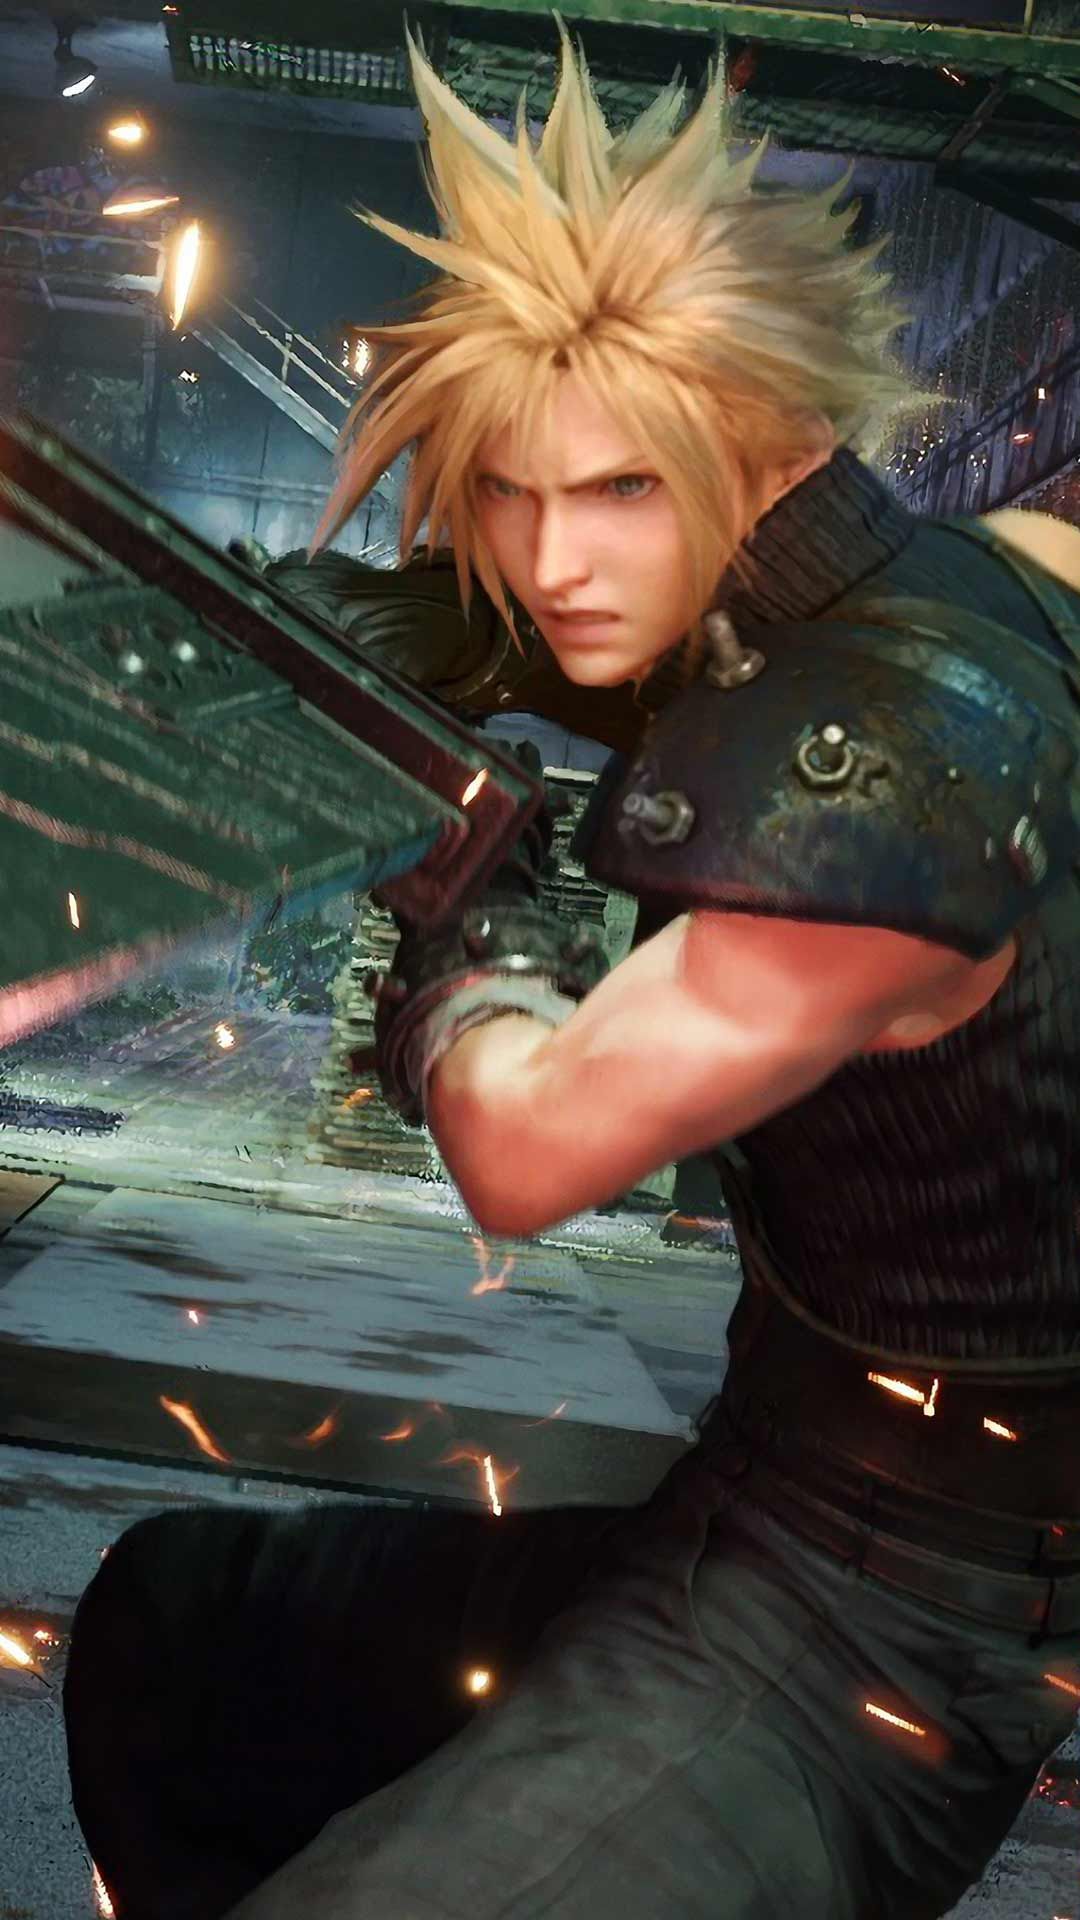 Final Fantasy 7 Remake wallpaper HD phone background PS4 game art poster logo on iPhone andro. Final fantasy, Final fantasy vii cloud, Final fantasy cloud strife